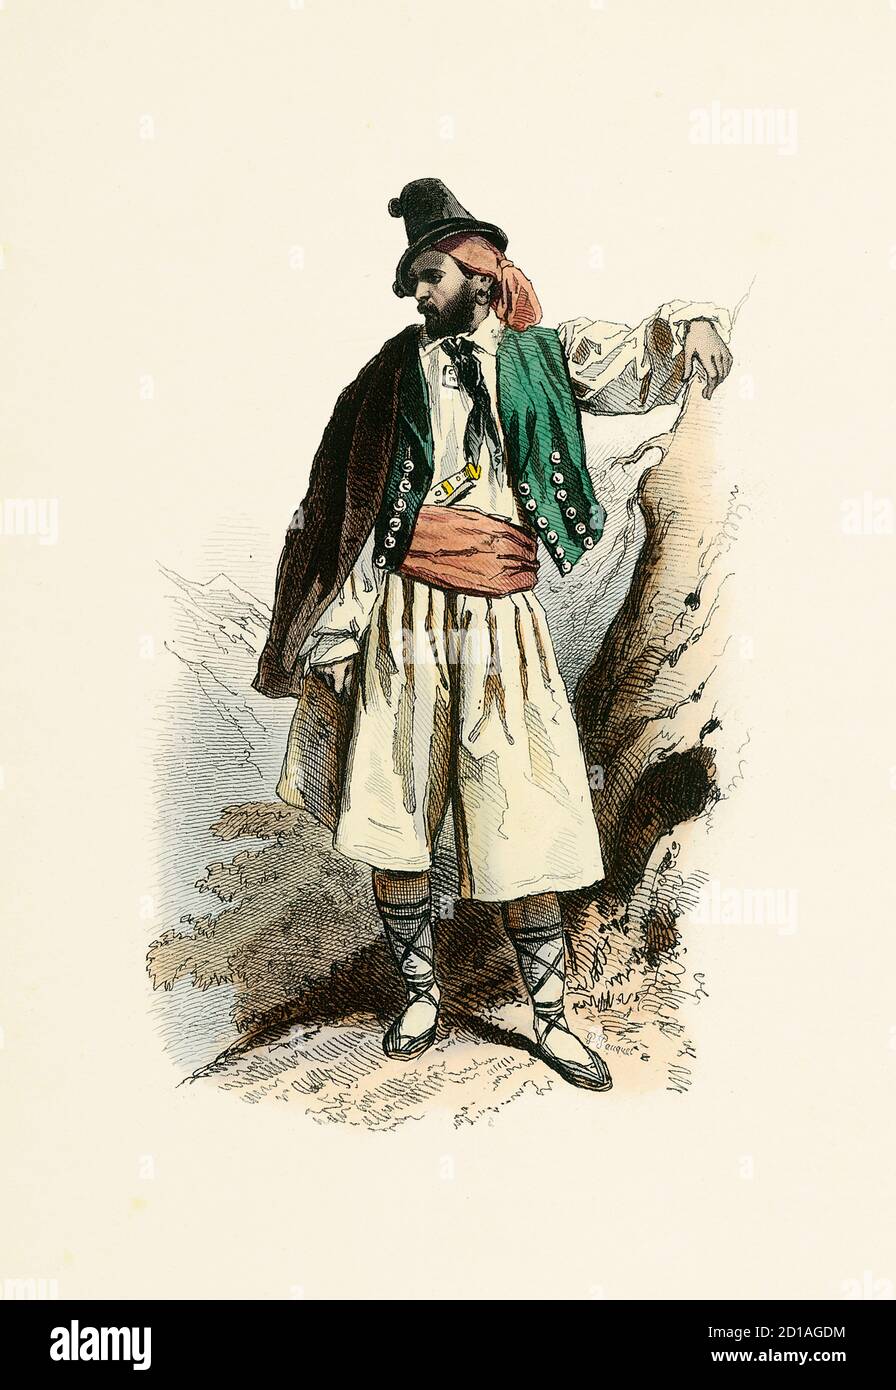 Portrait of man from Valencia, Spain in 1850, hand-colored engraving by H. Pauquet. Published in the the book Modes et Costumes Historiques Dessines e Stock Photo